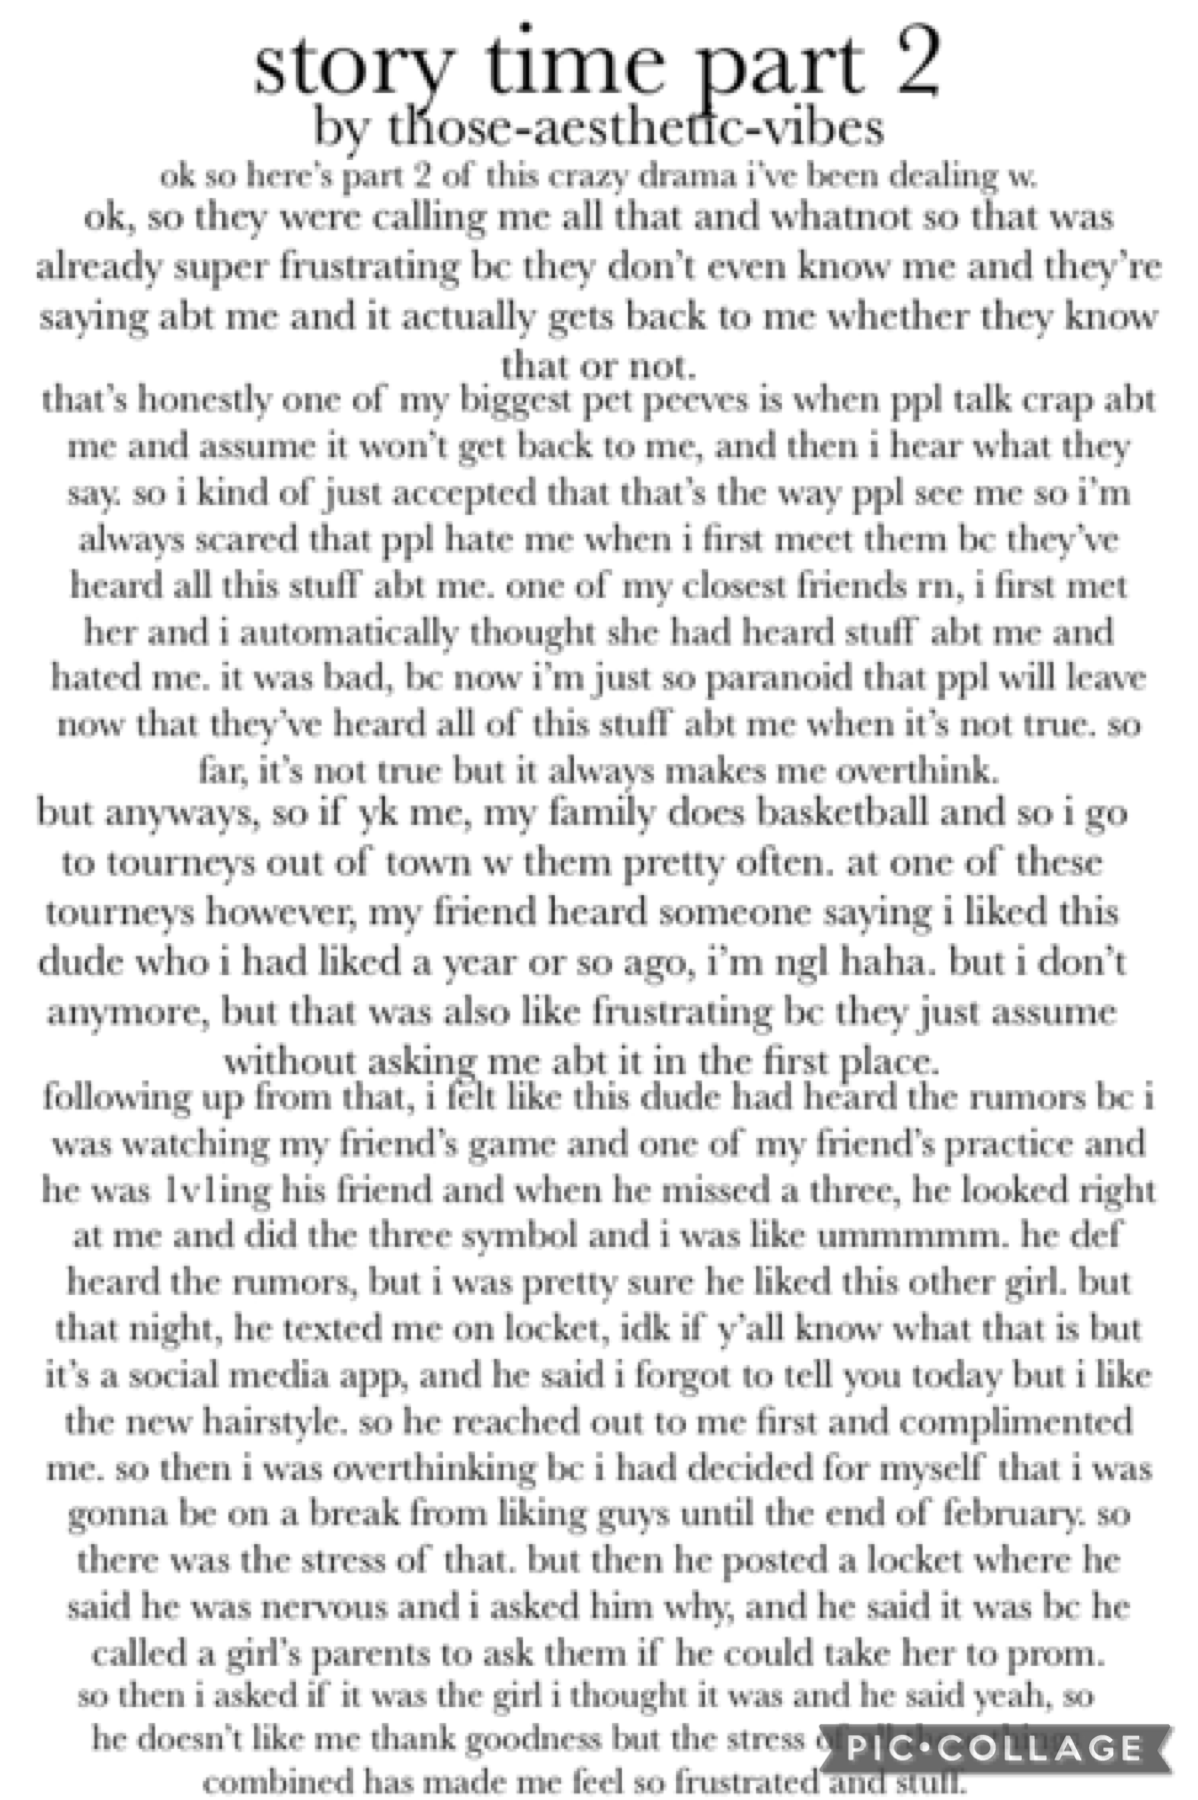 story time part 2
here is the last part! sorry it’s so blurry, i had to take a ss bc it wasn’t posting. but feel free to reach out to me if you hv gone through some of this bc i’d love to talk you up abt it!